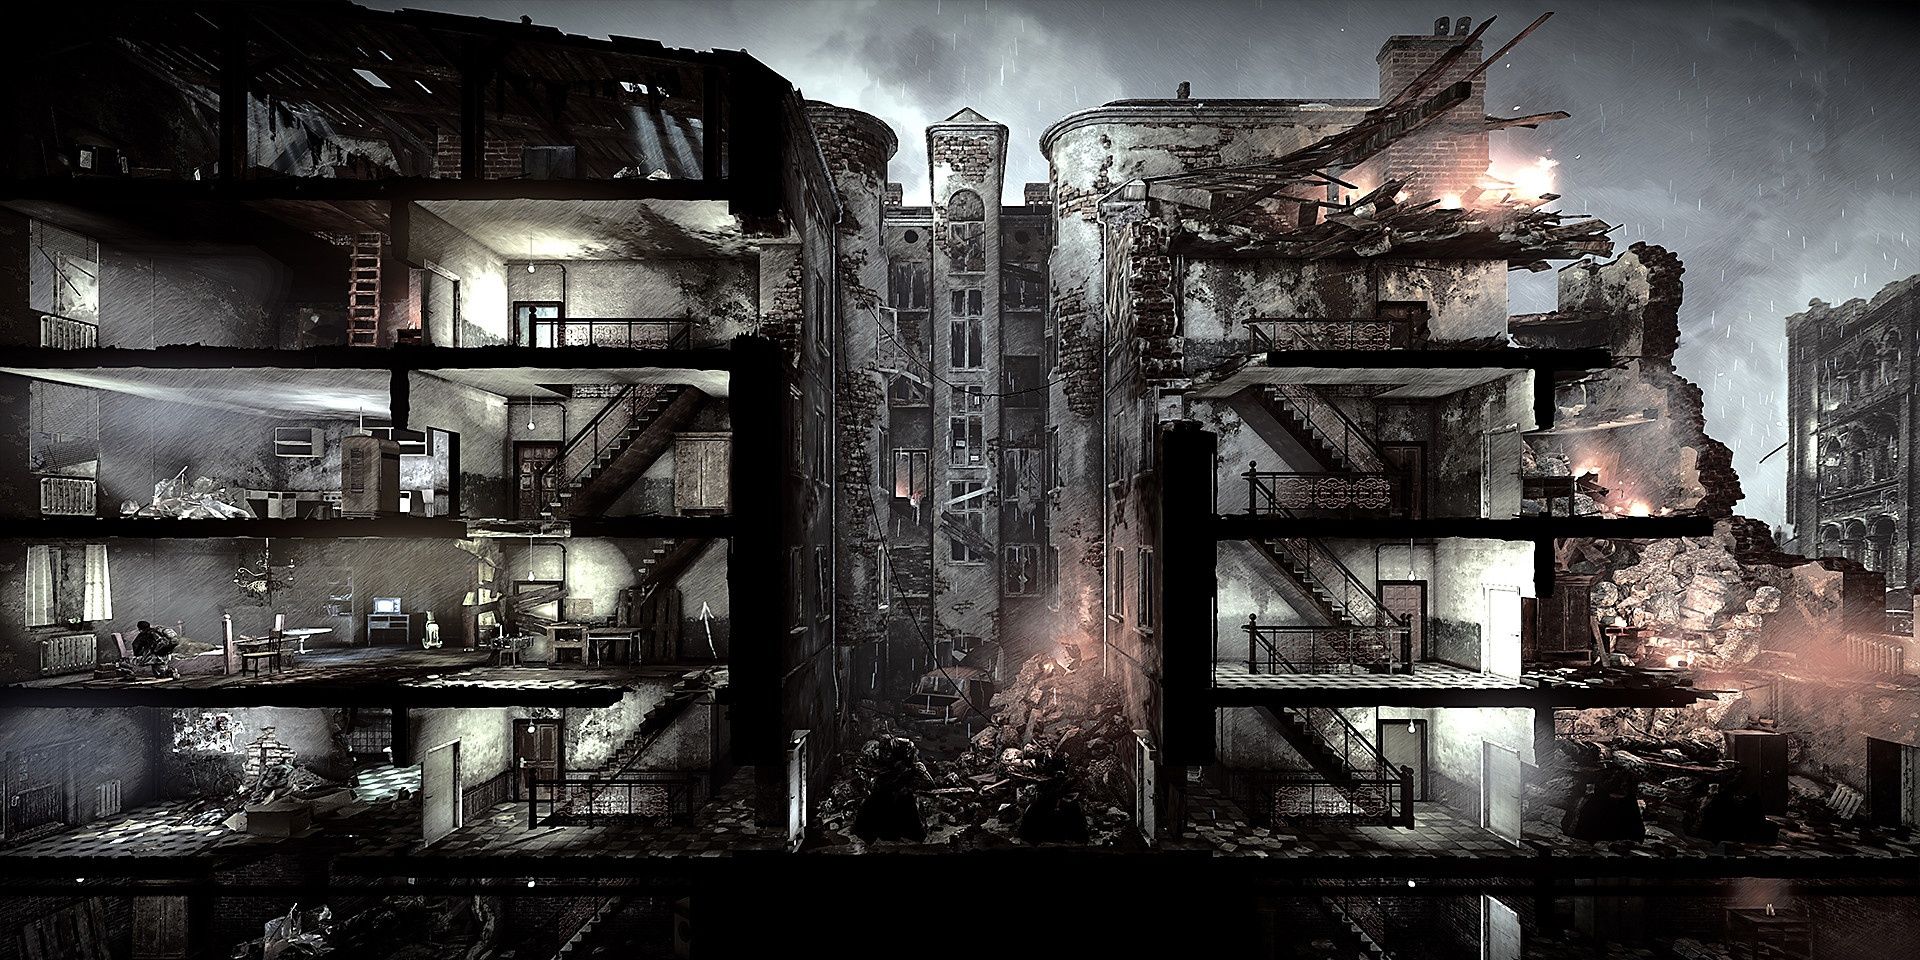 In This War of Mine, makeshift shelters collapse under conditions of war